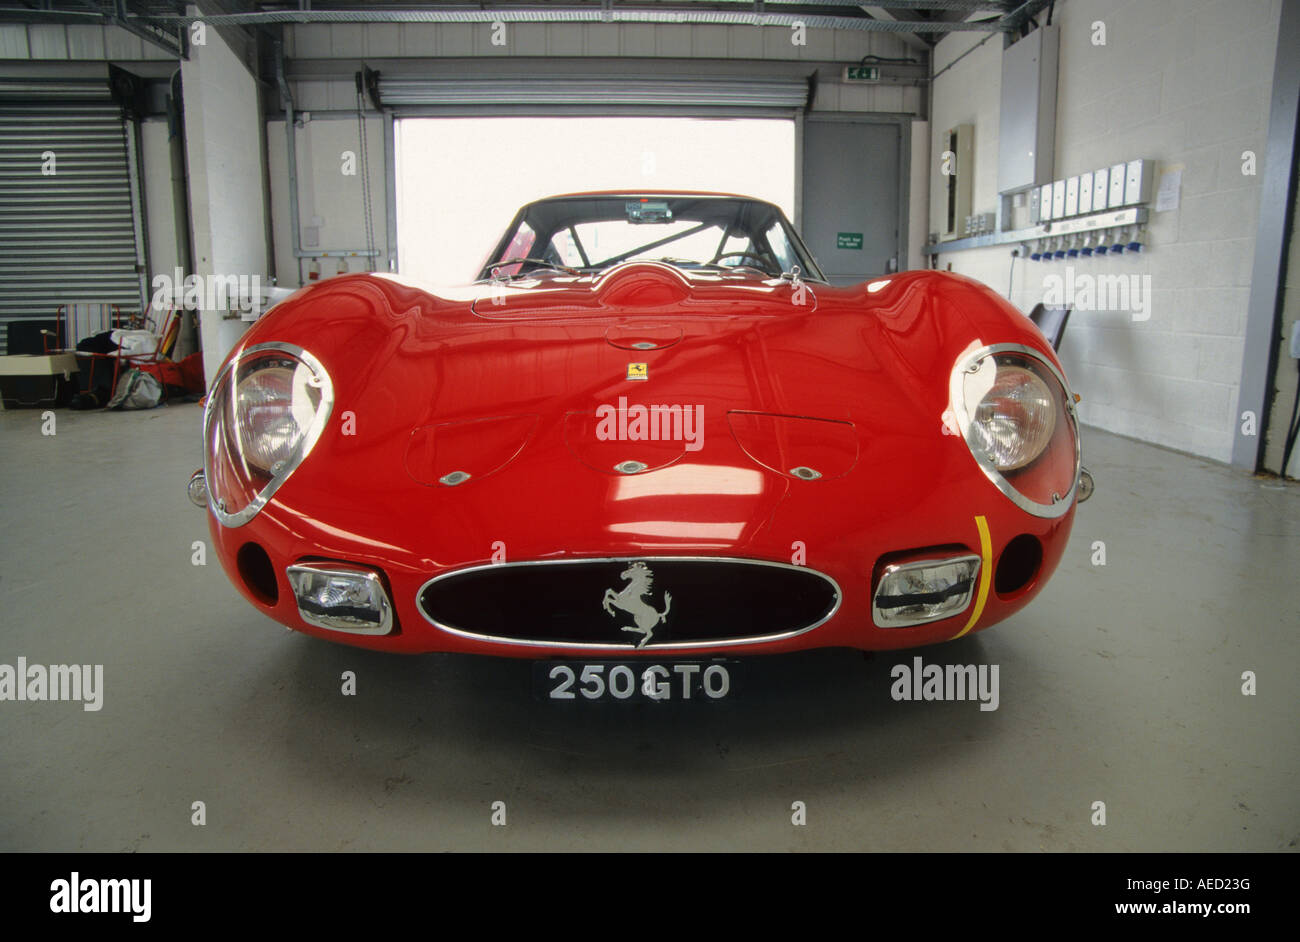 Ferrari 250GTO Berlinetta. Introduced 1962. front shot view angle aspect perspective headon head on low wide dramatic garage Stock Photo